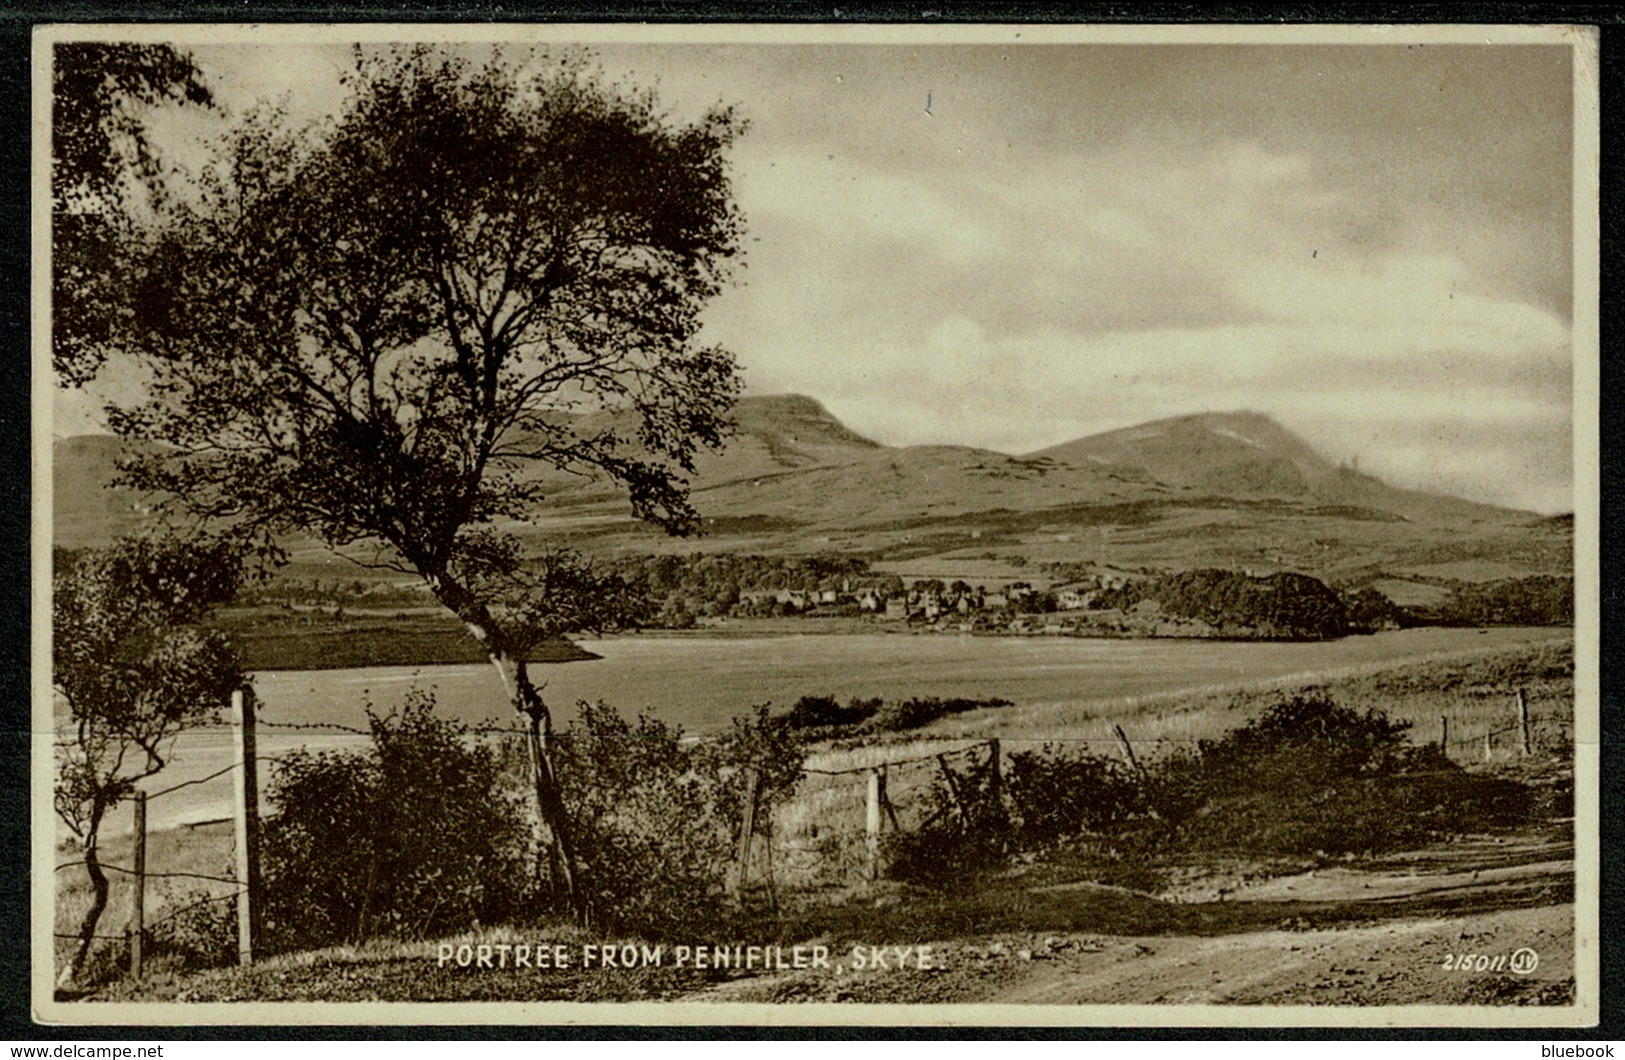 Ref 1244 - 1936 Postcard - Portree From Penifiler Isle Of Skye - Inverness-shire Scotland - Inverness-shire